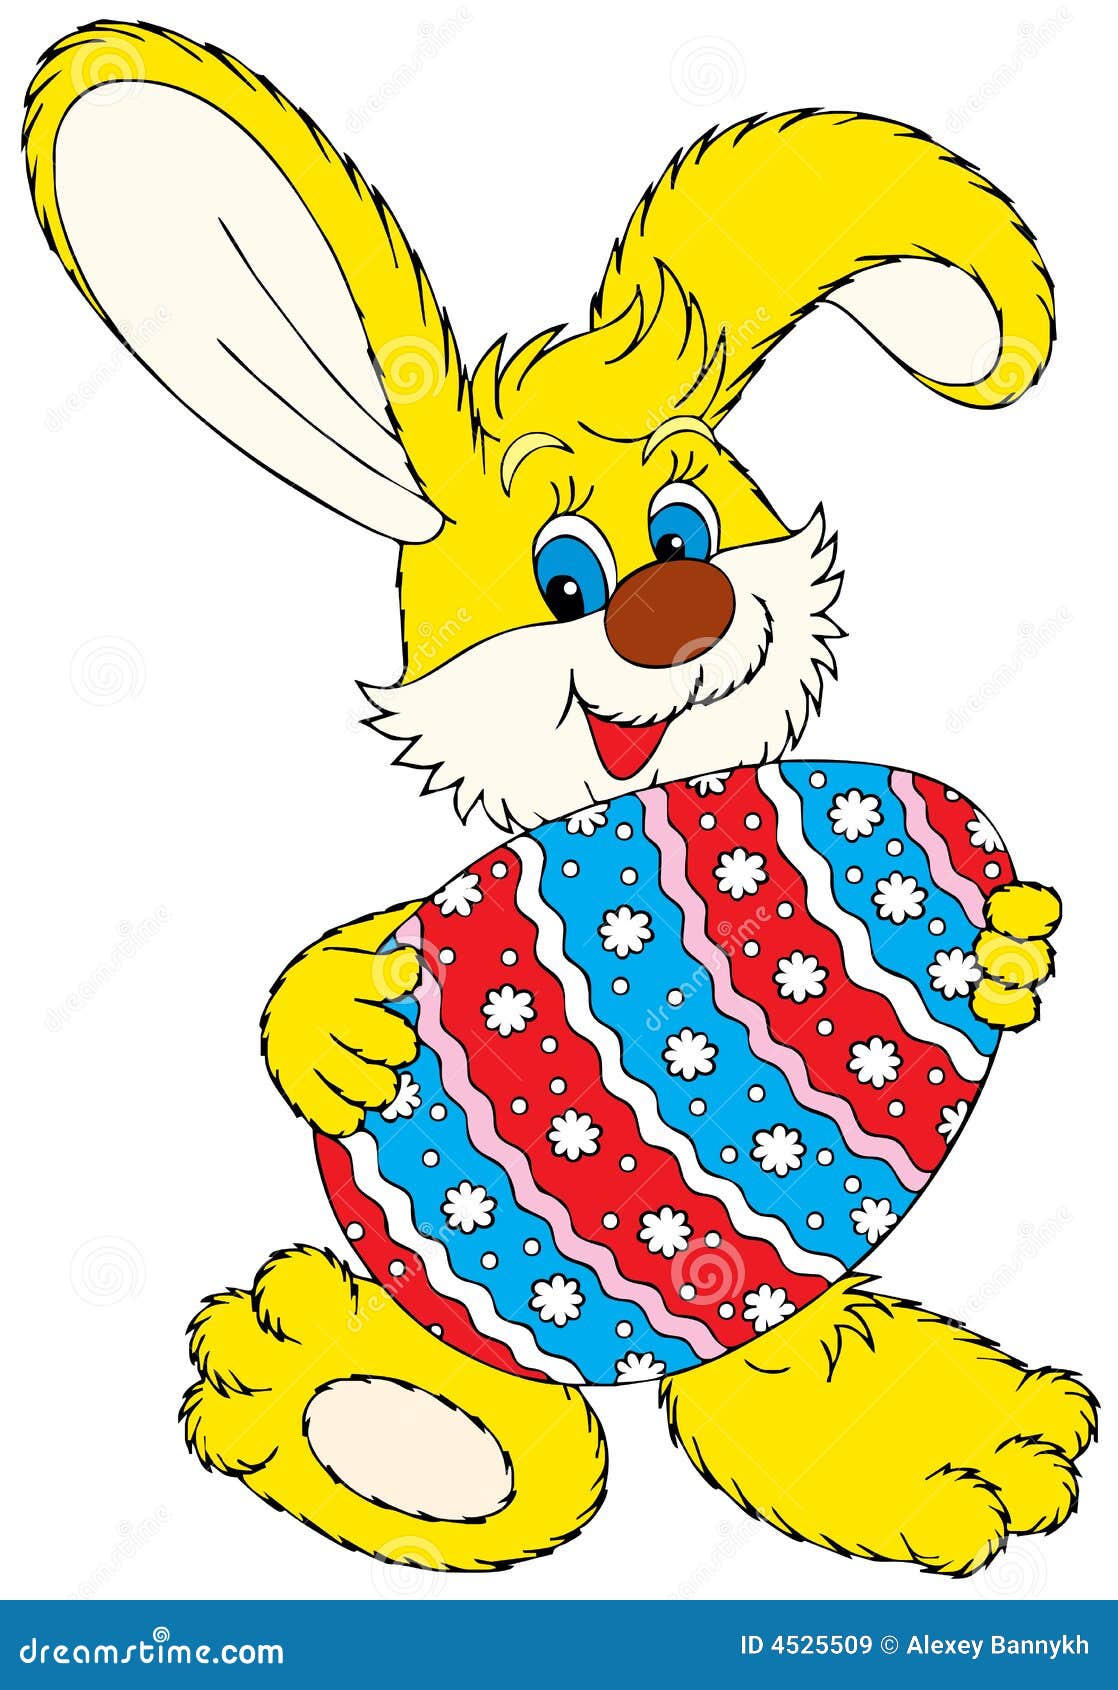 royalty free easter clip art - photo #46